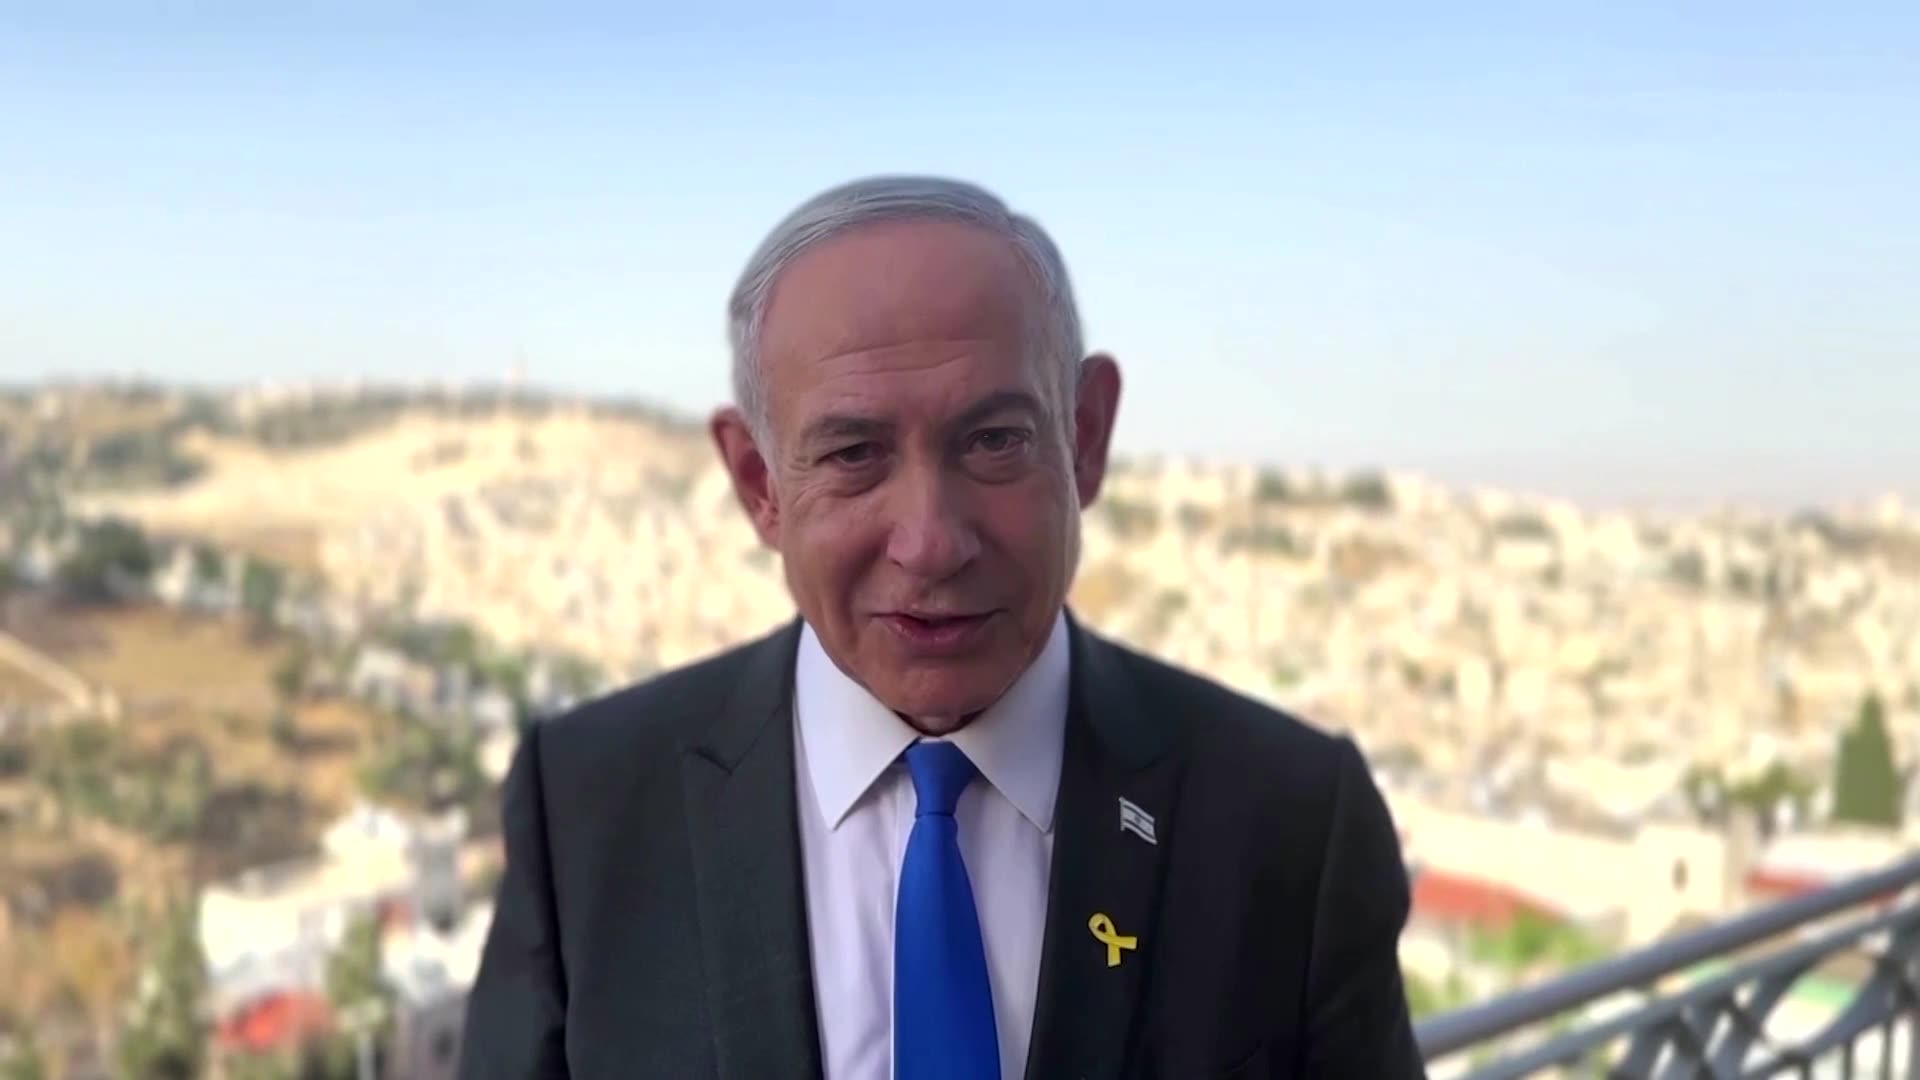 Netanyahu: we'll fight with 'fingernails' if needs be